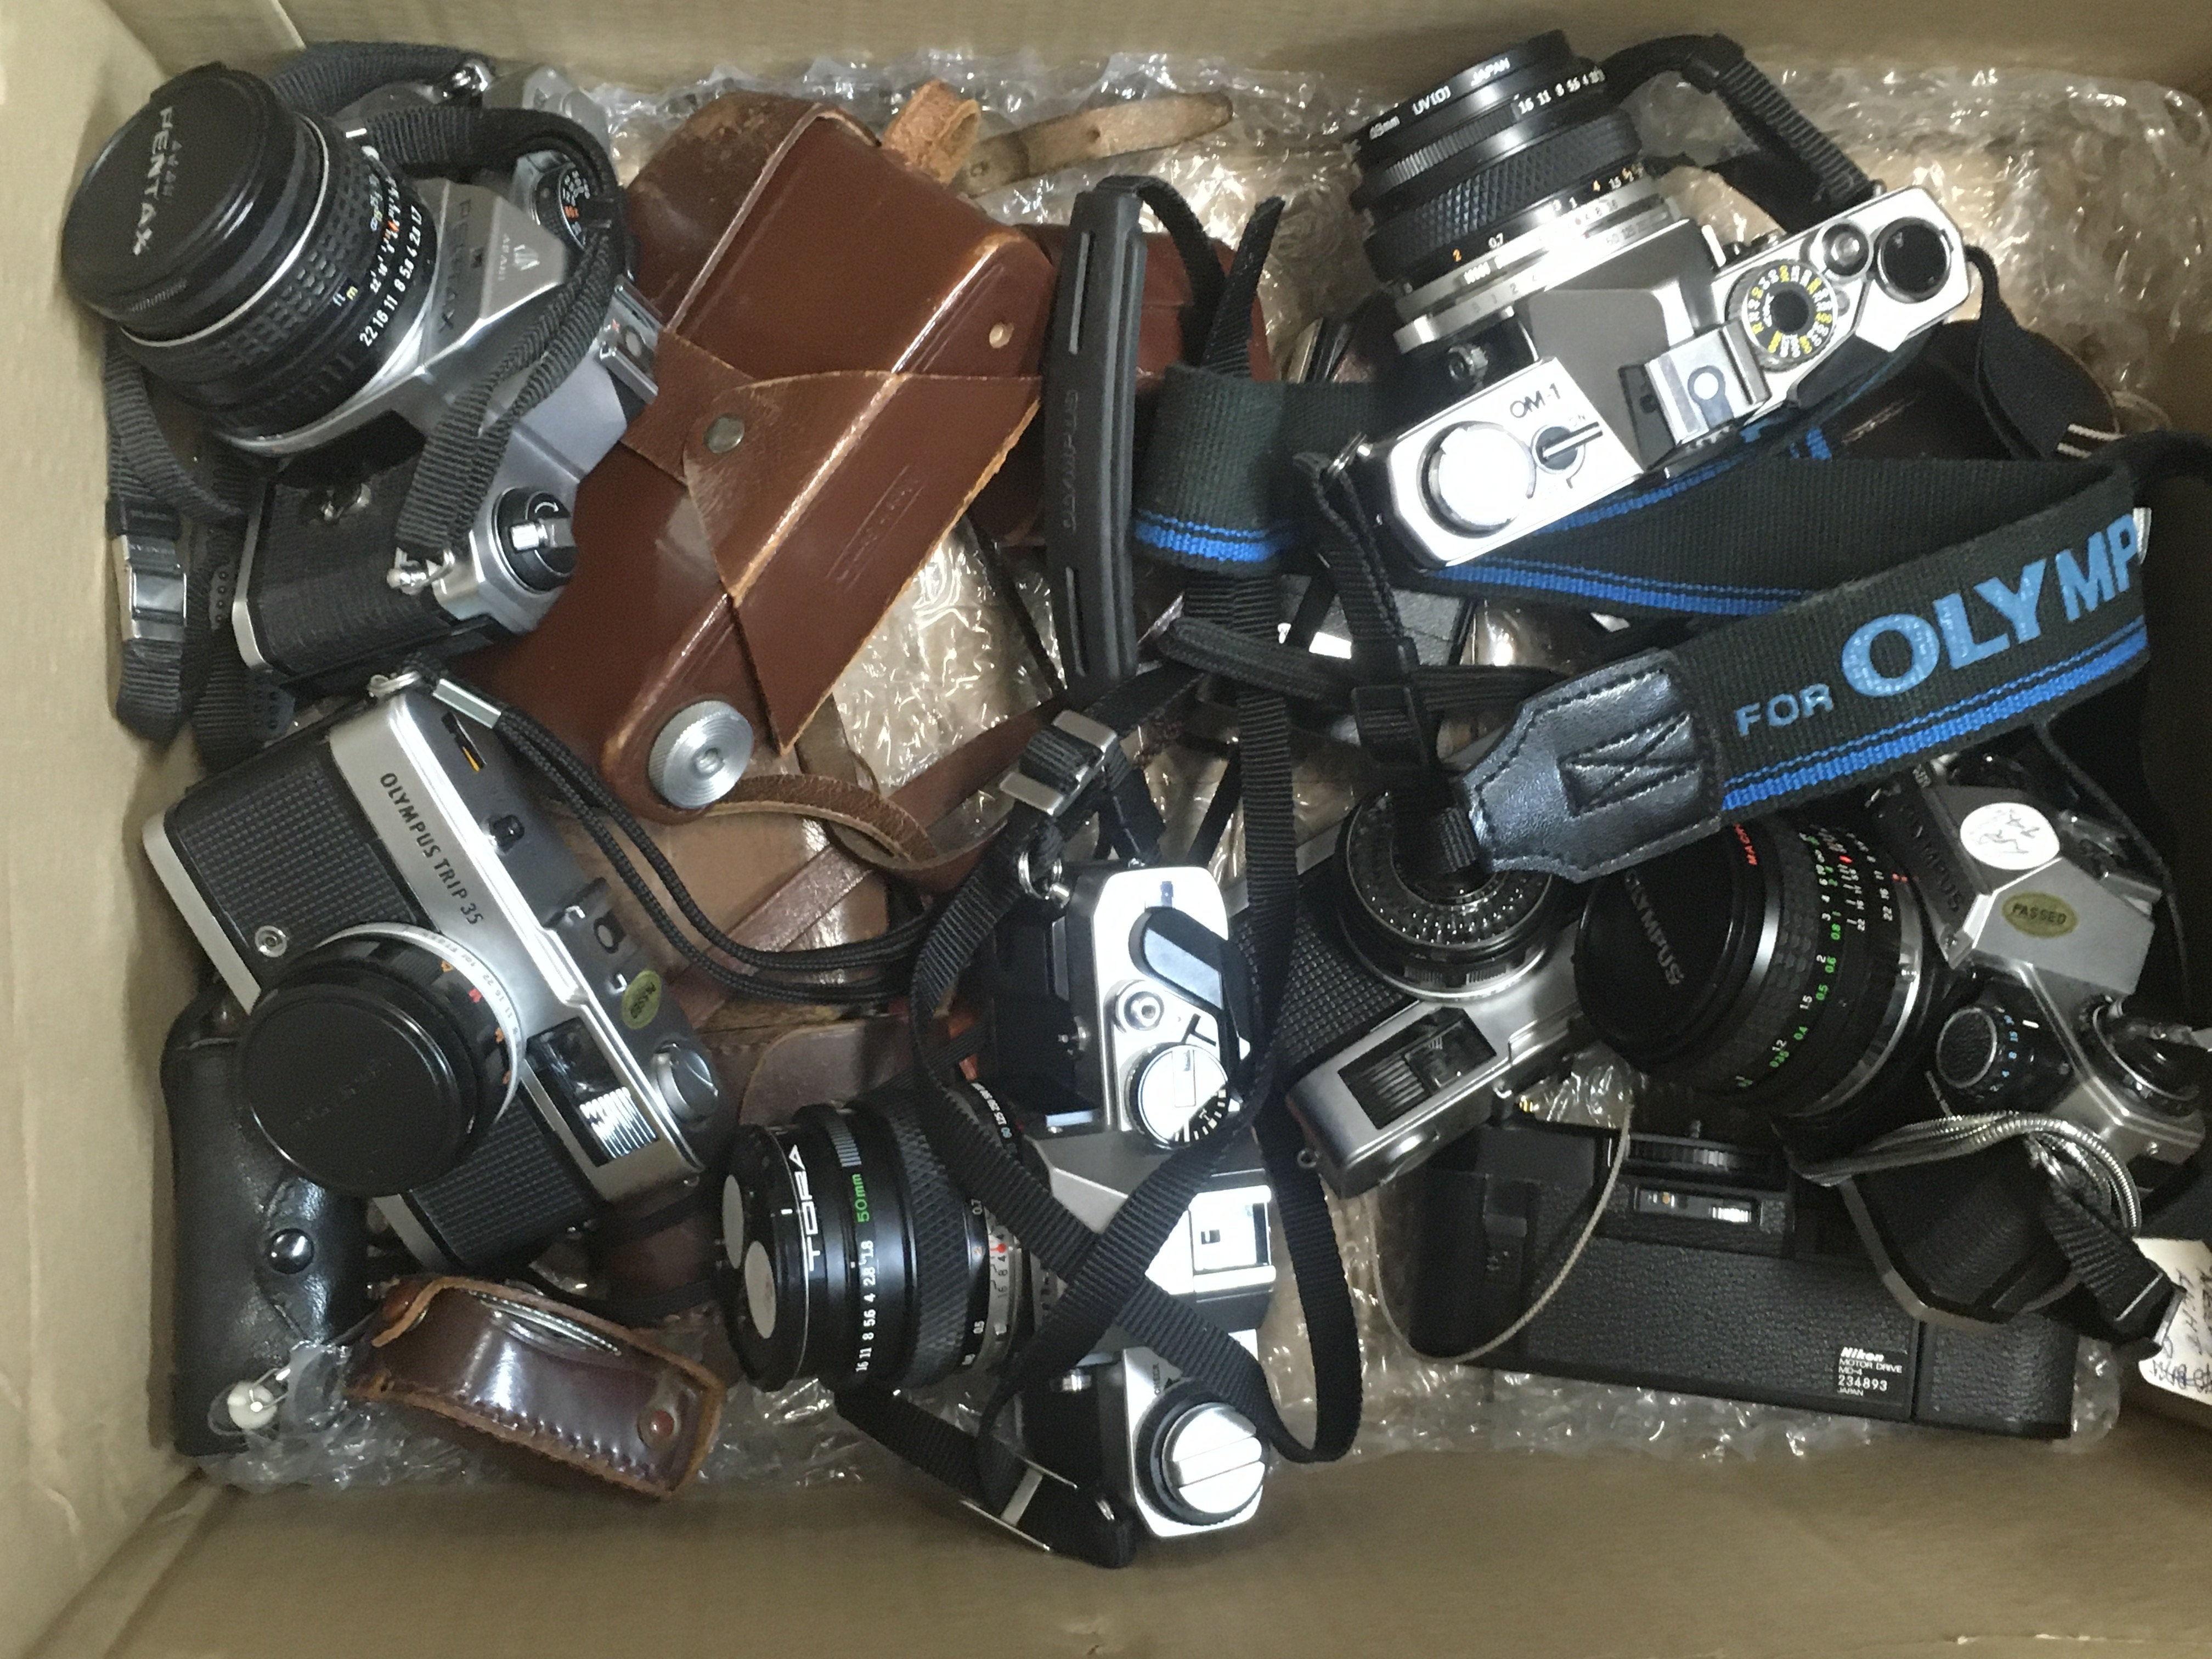 A collection of Vintage cameras and accessories in